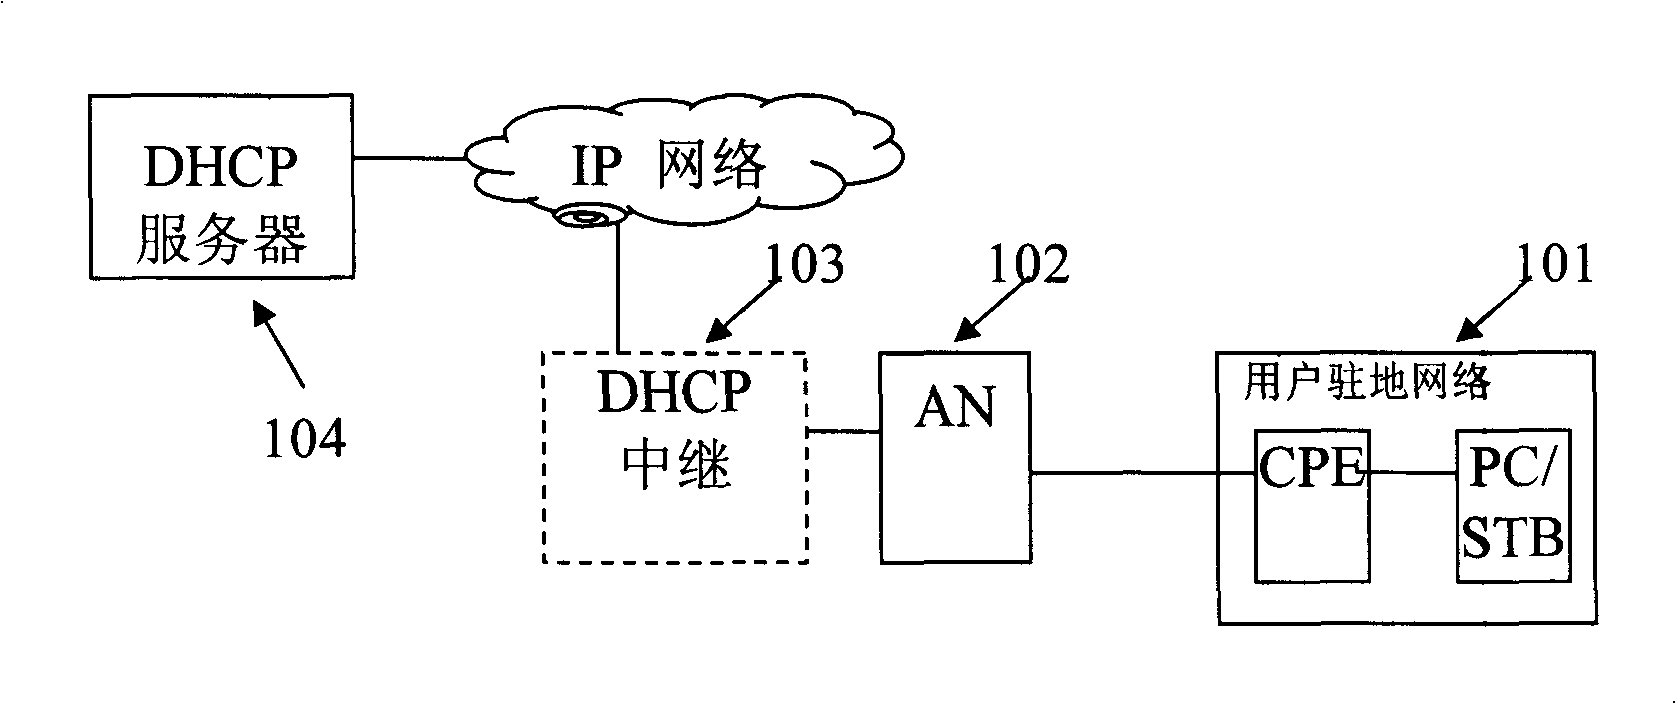 Devices for implementing anti-spurious IP address on AN and methods therefor